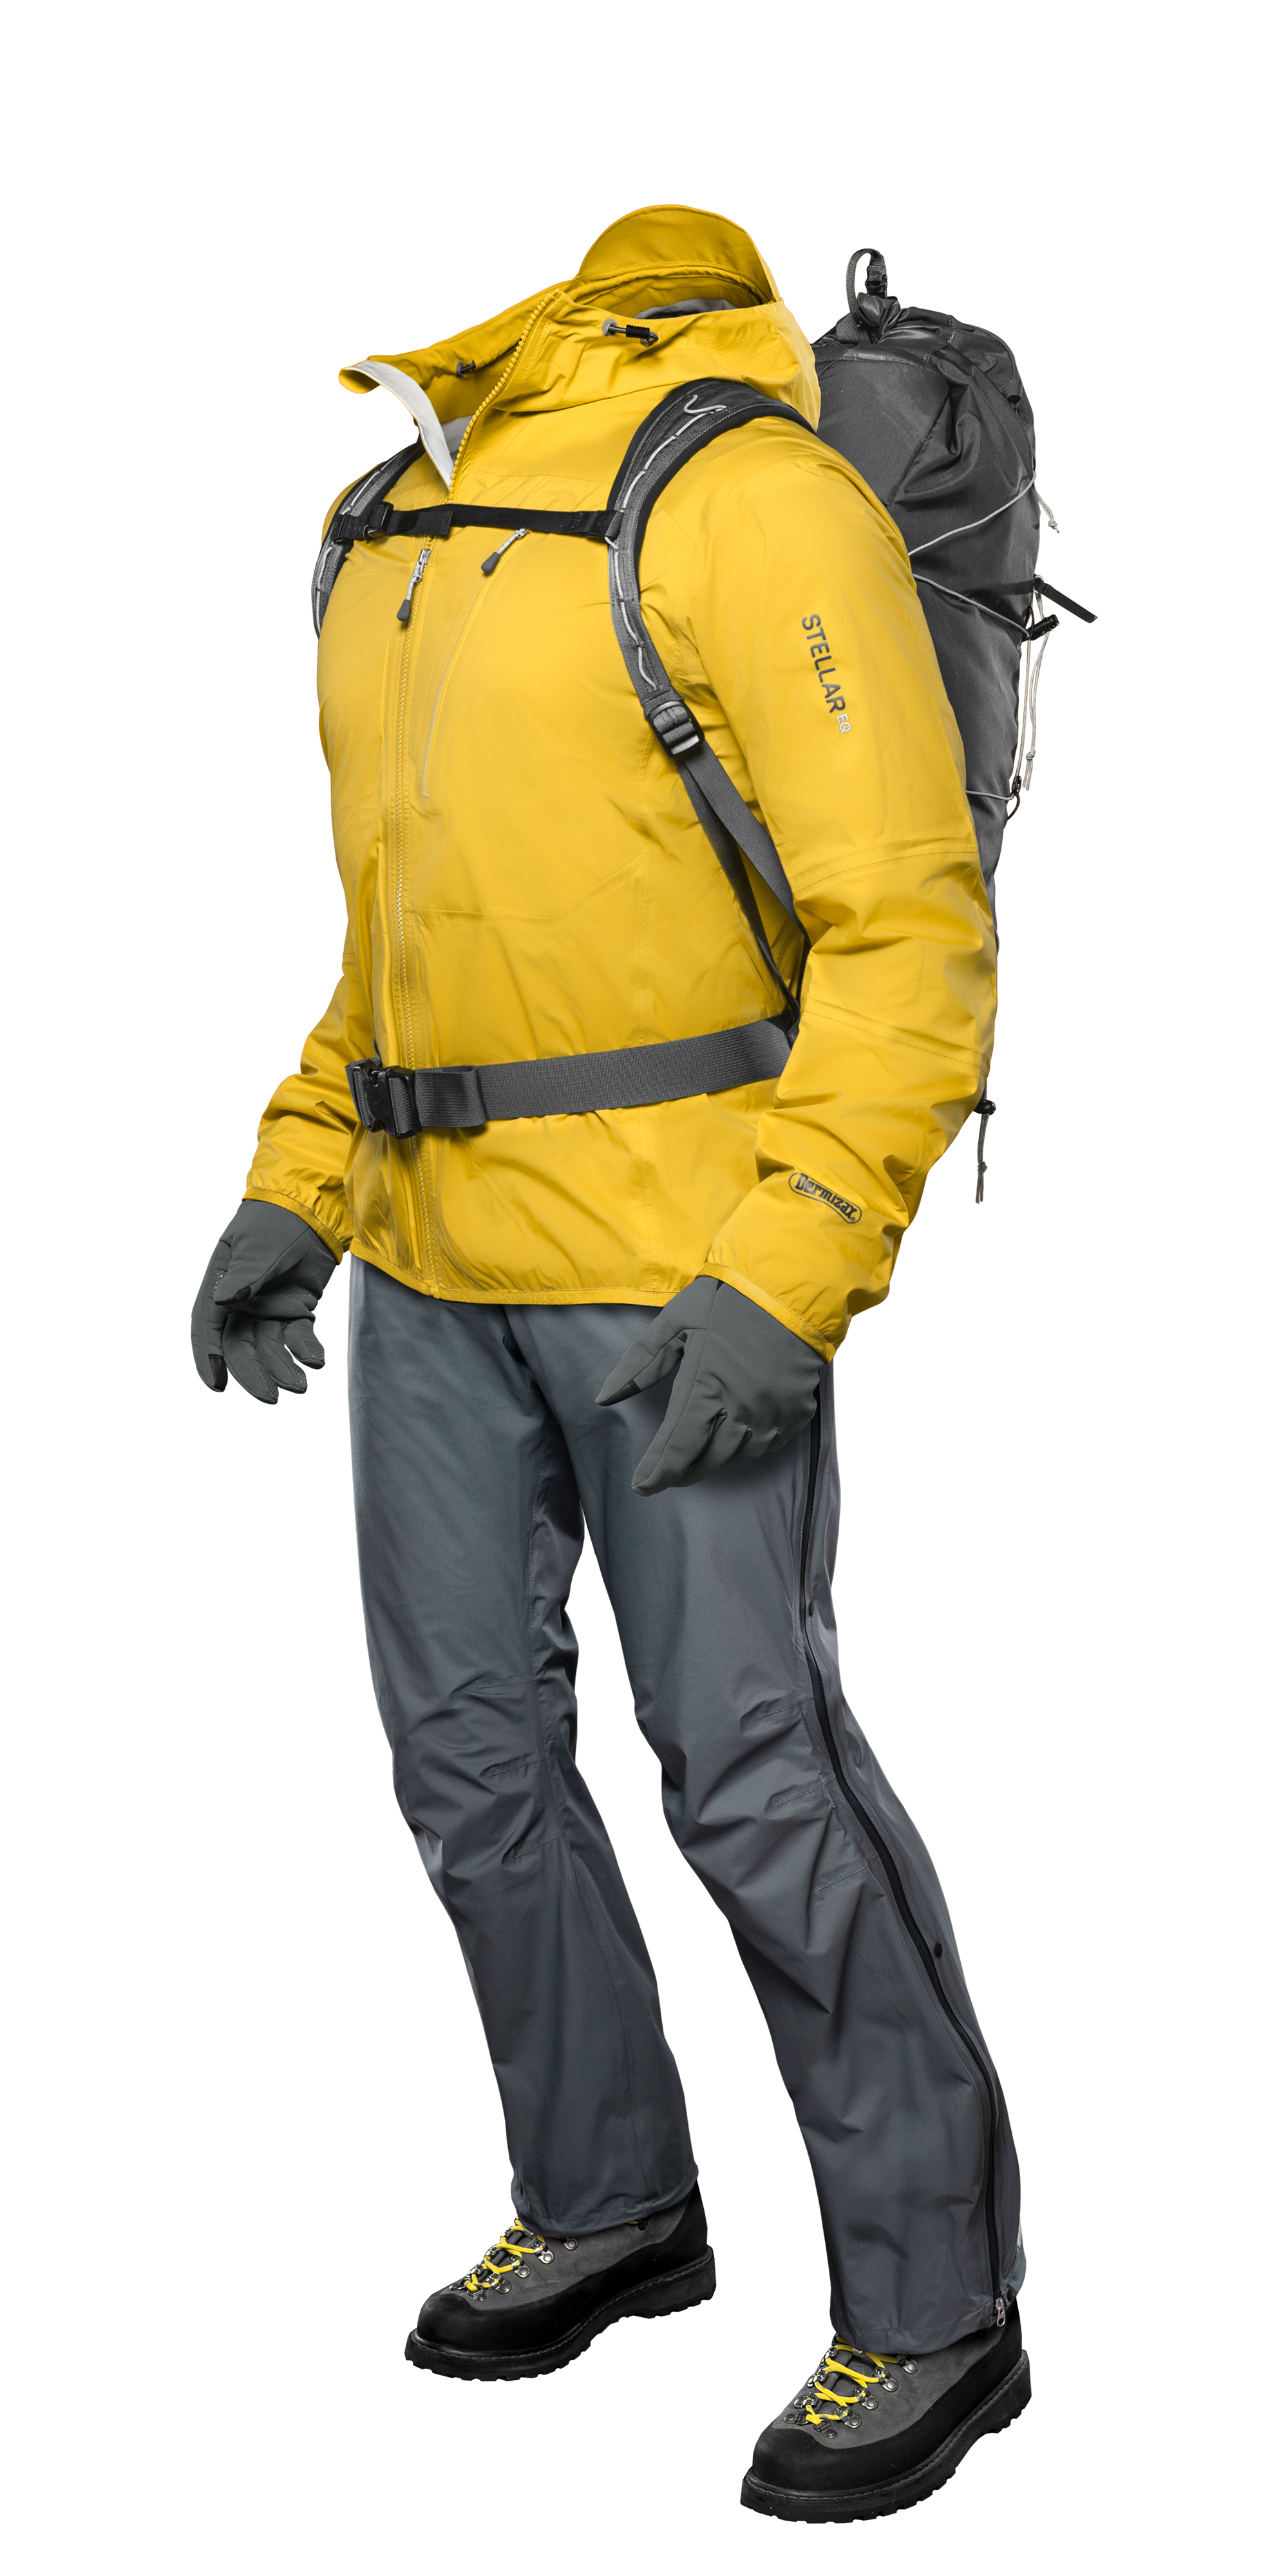 The [YELLOW+GREY] Ultralight System Image